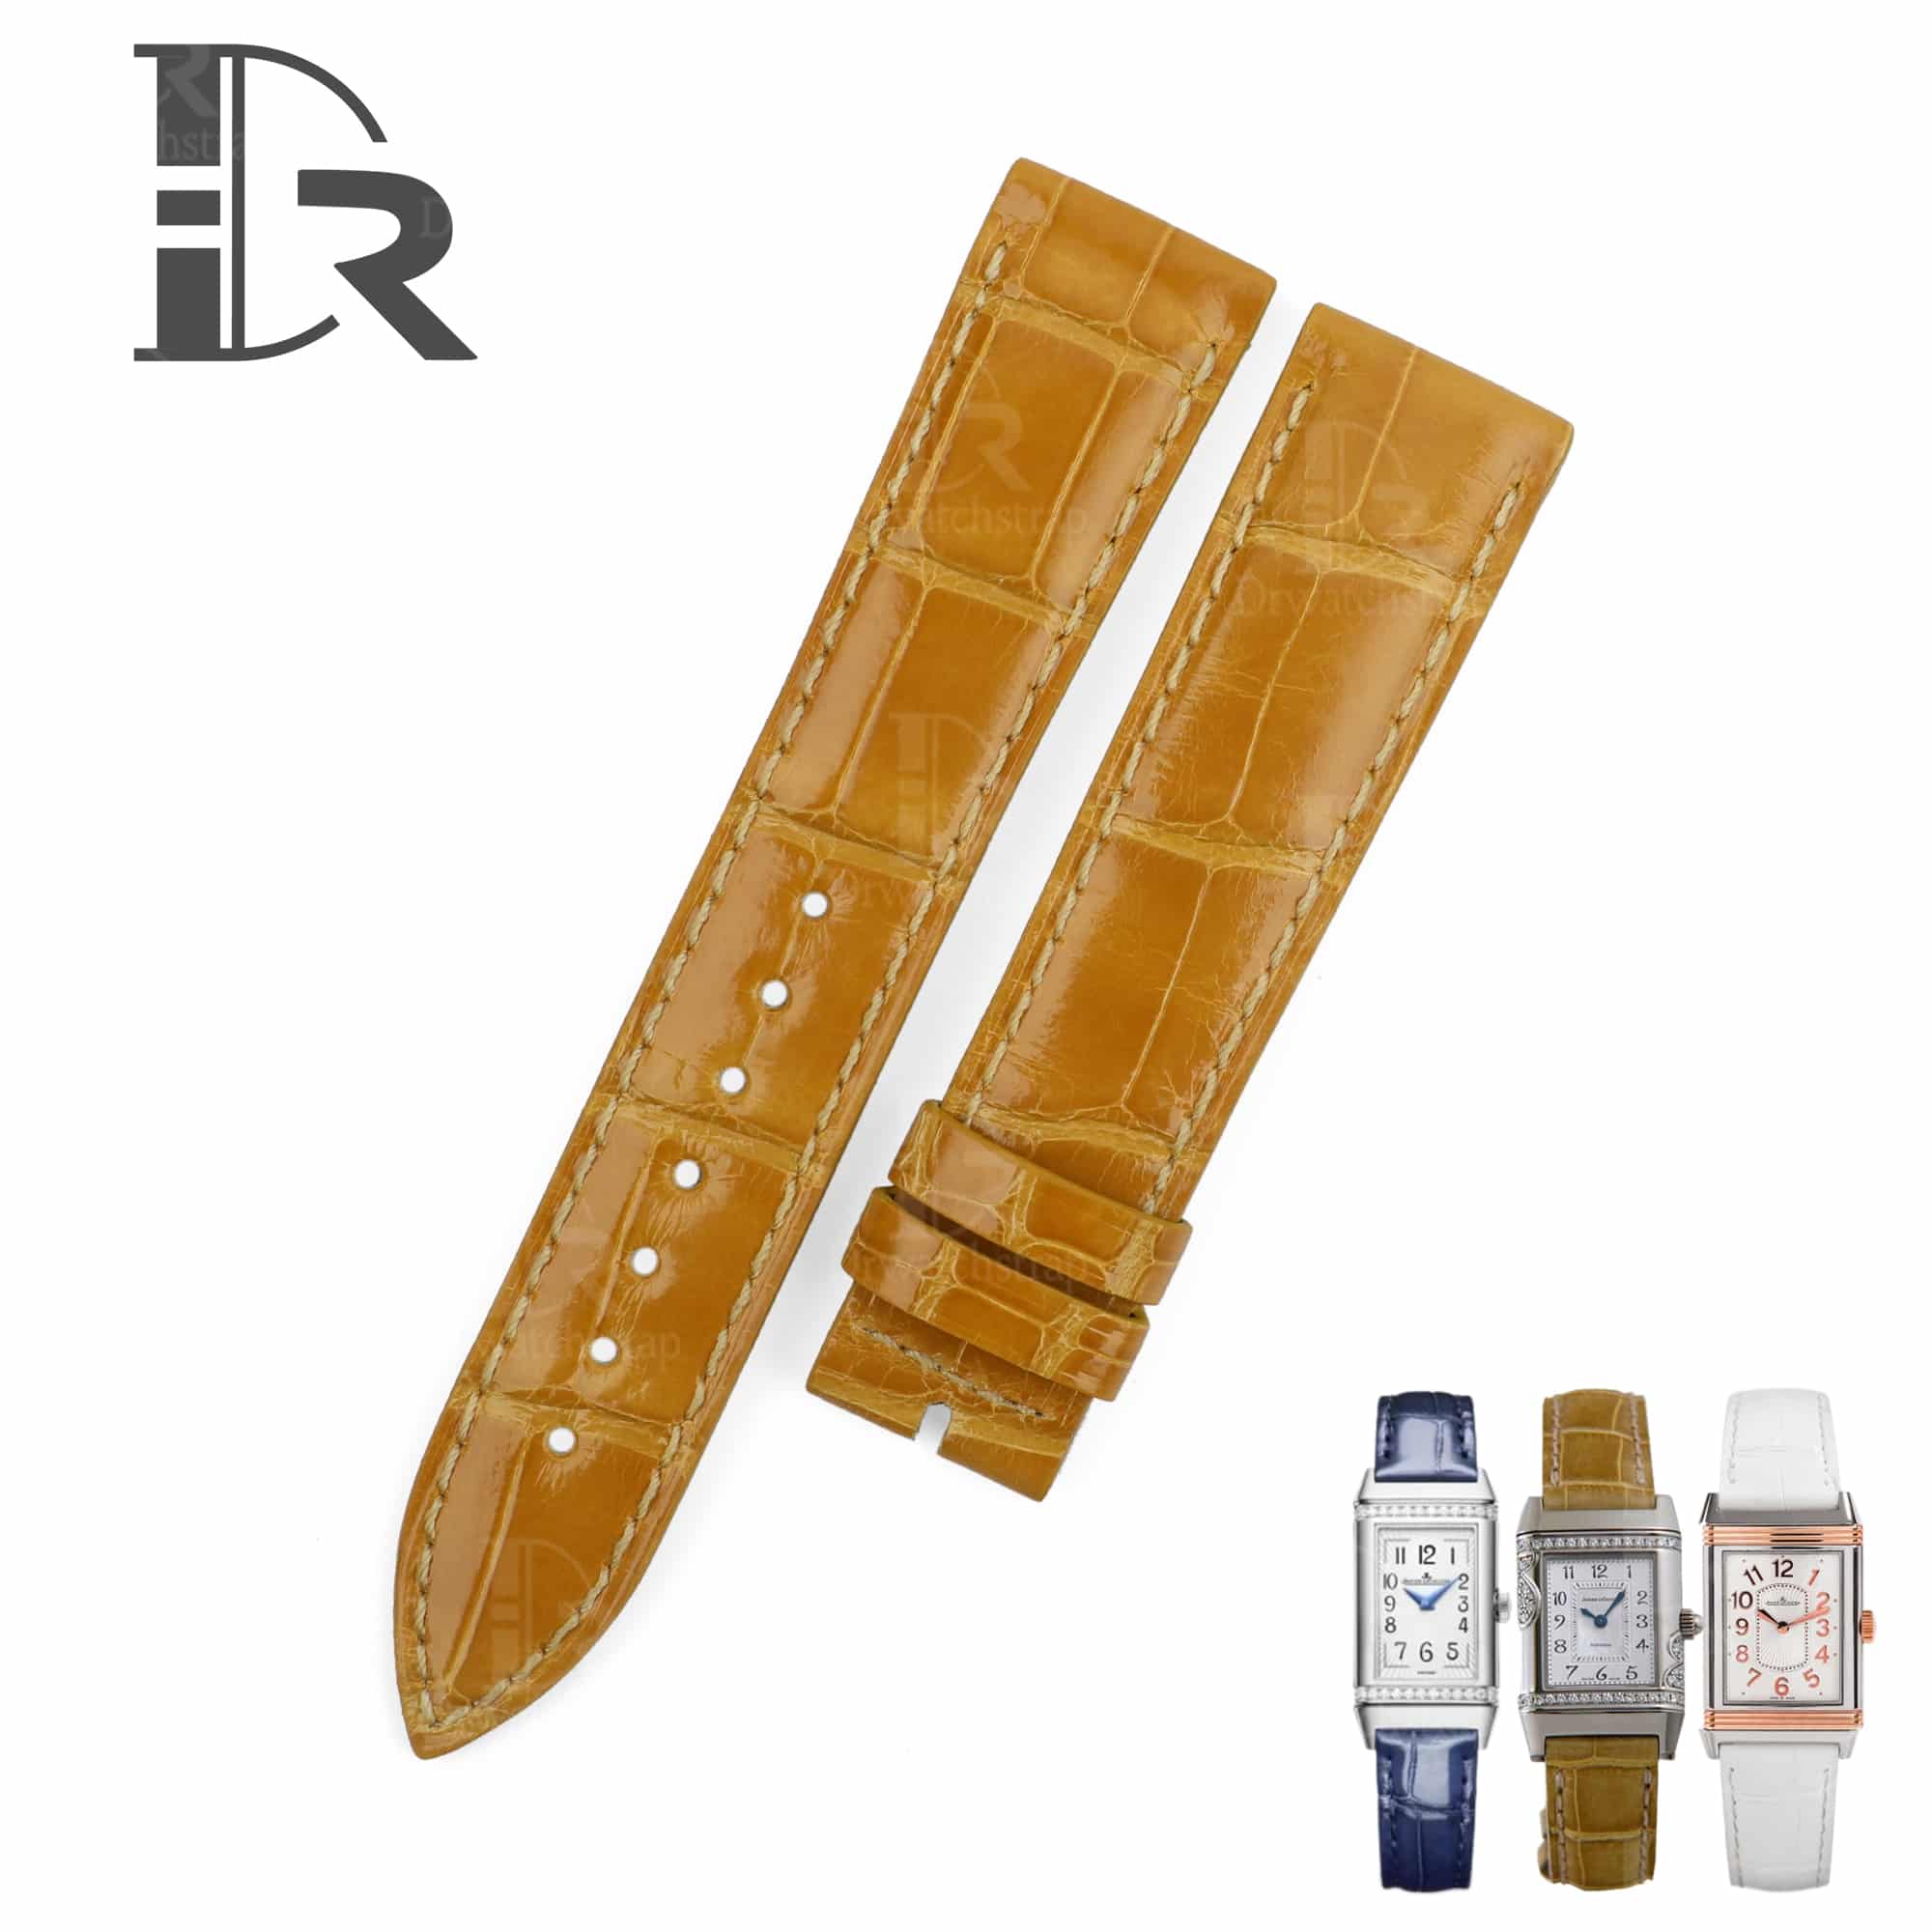 Jaeger Lecoultre Ladies Reverso strap Yellow brown Alligator watch band Low price for sale. Handmade customized leather strap for luxury watches China factory maker